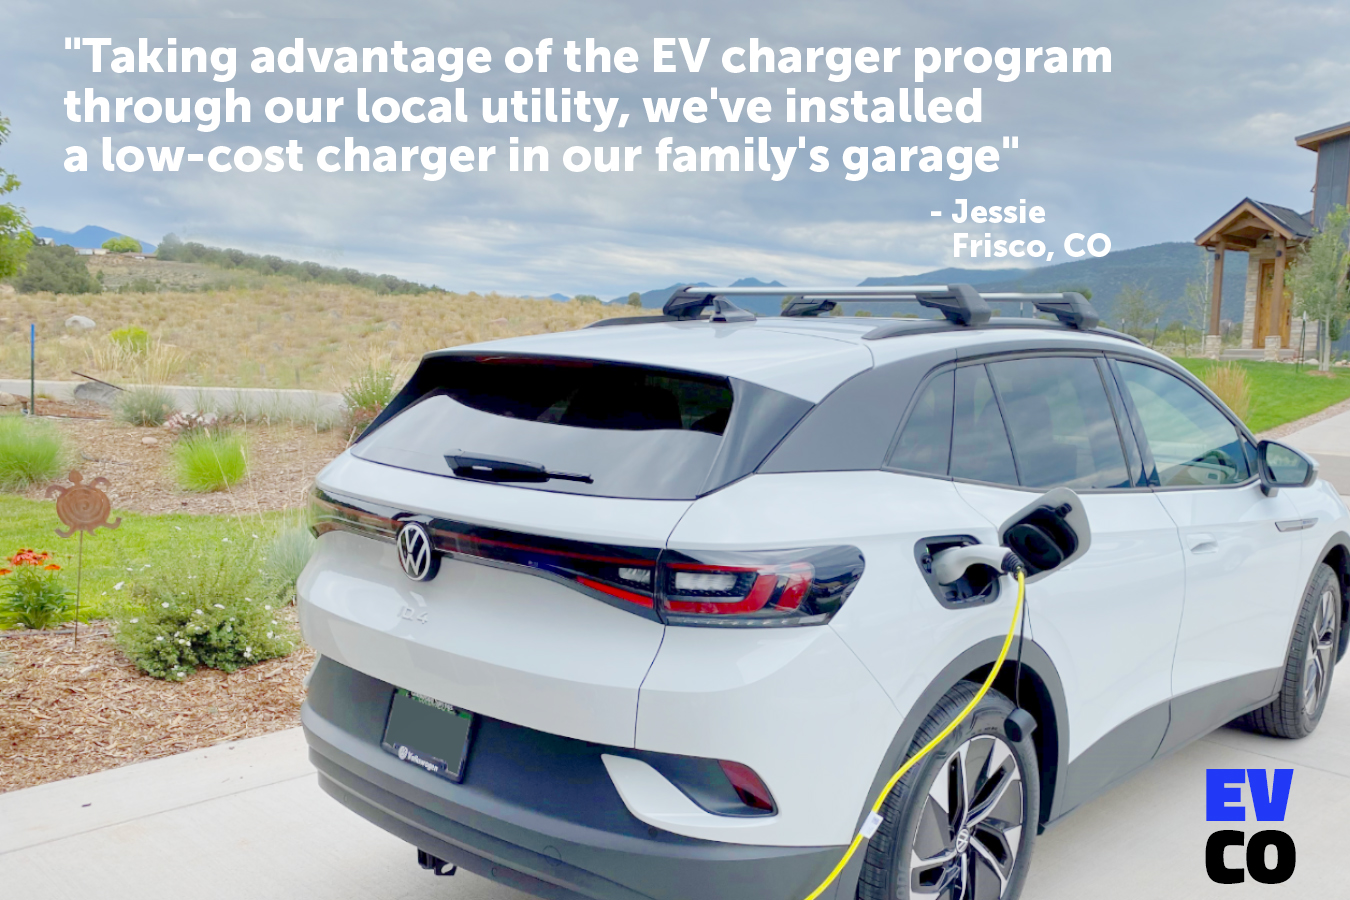 Quote saying "Taking advantage of the EV charger program through our local utility, we've installed a low-cost charger in our family's garage," attributed to Jessie, in Frisco, CO. Image of a VW iD4 being charged.